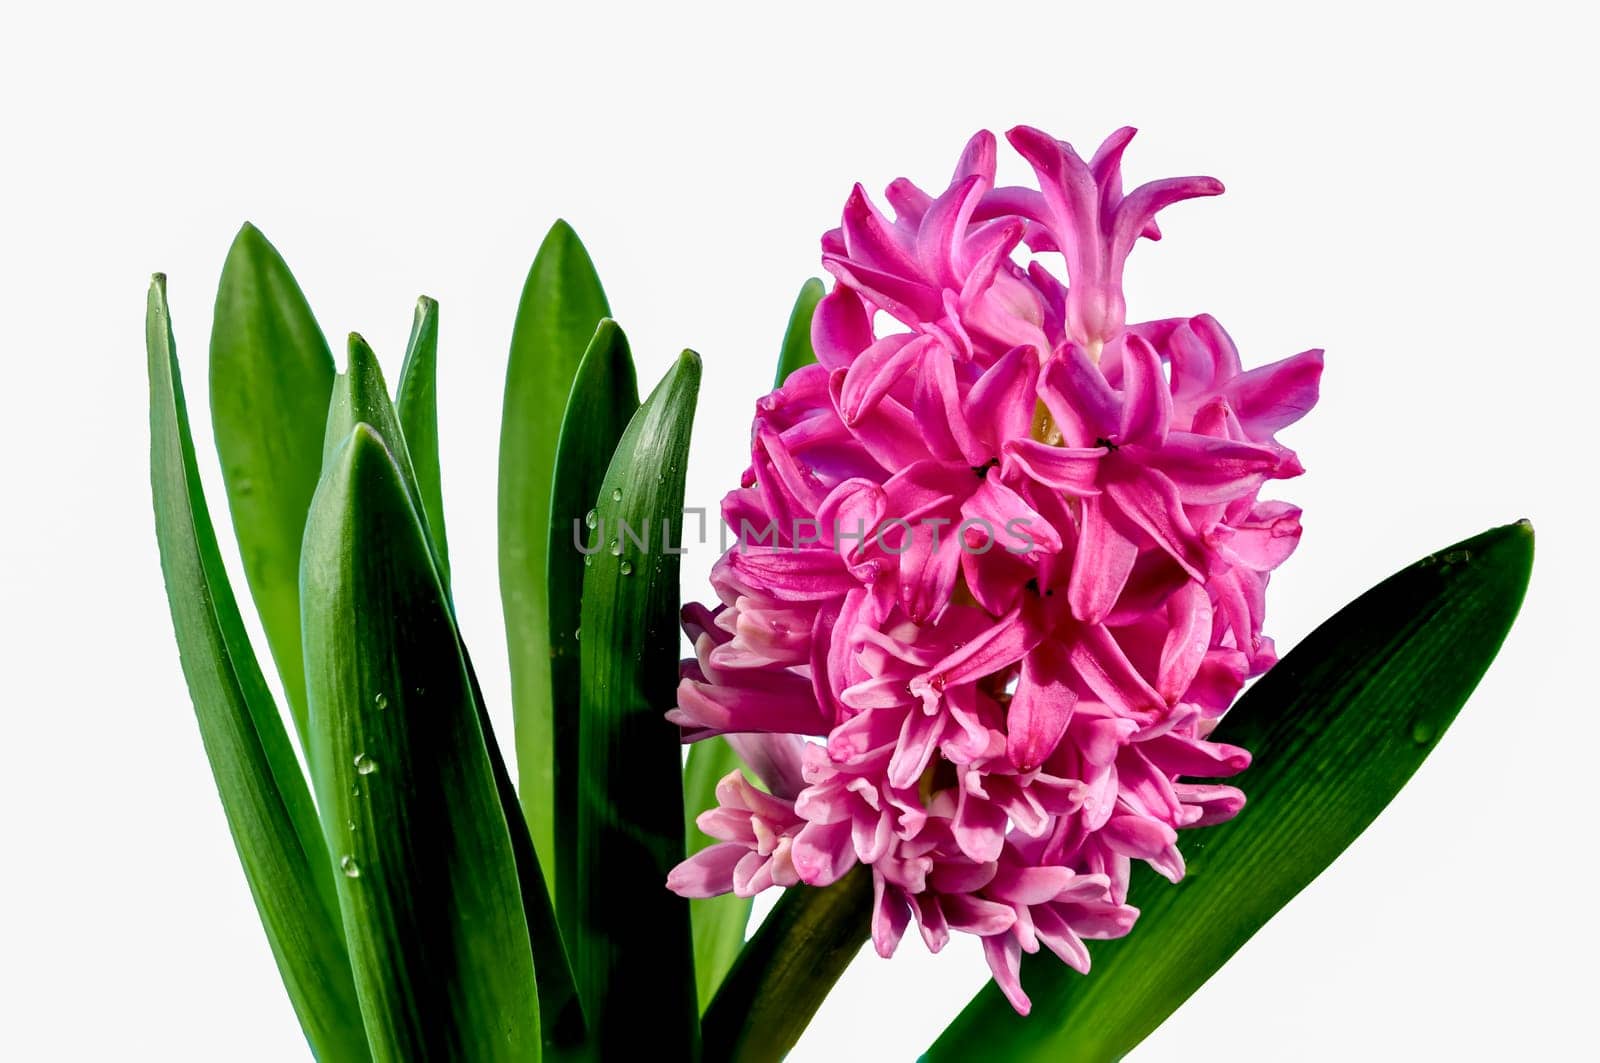 Beautiful blooming Pink Hyacinth flower isolated on a white background. Flower head close-up.